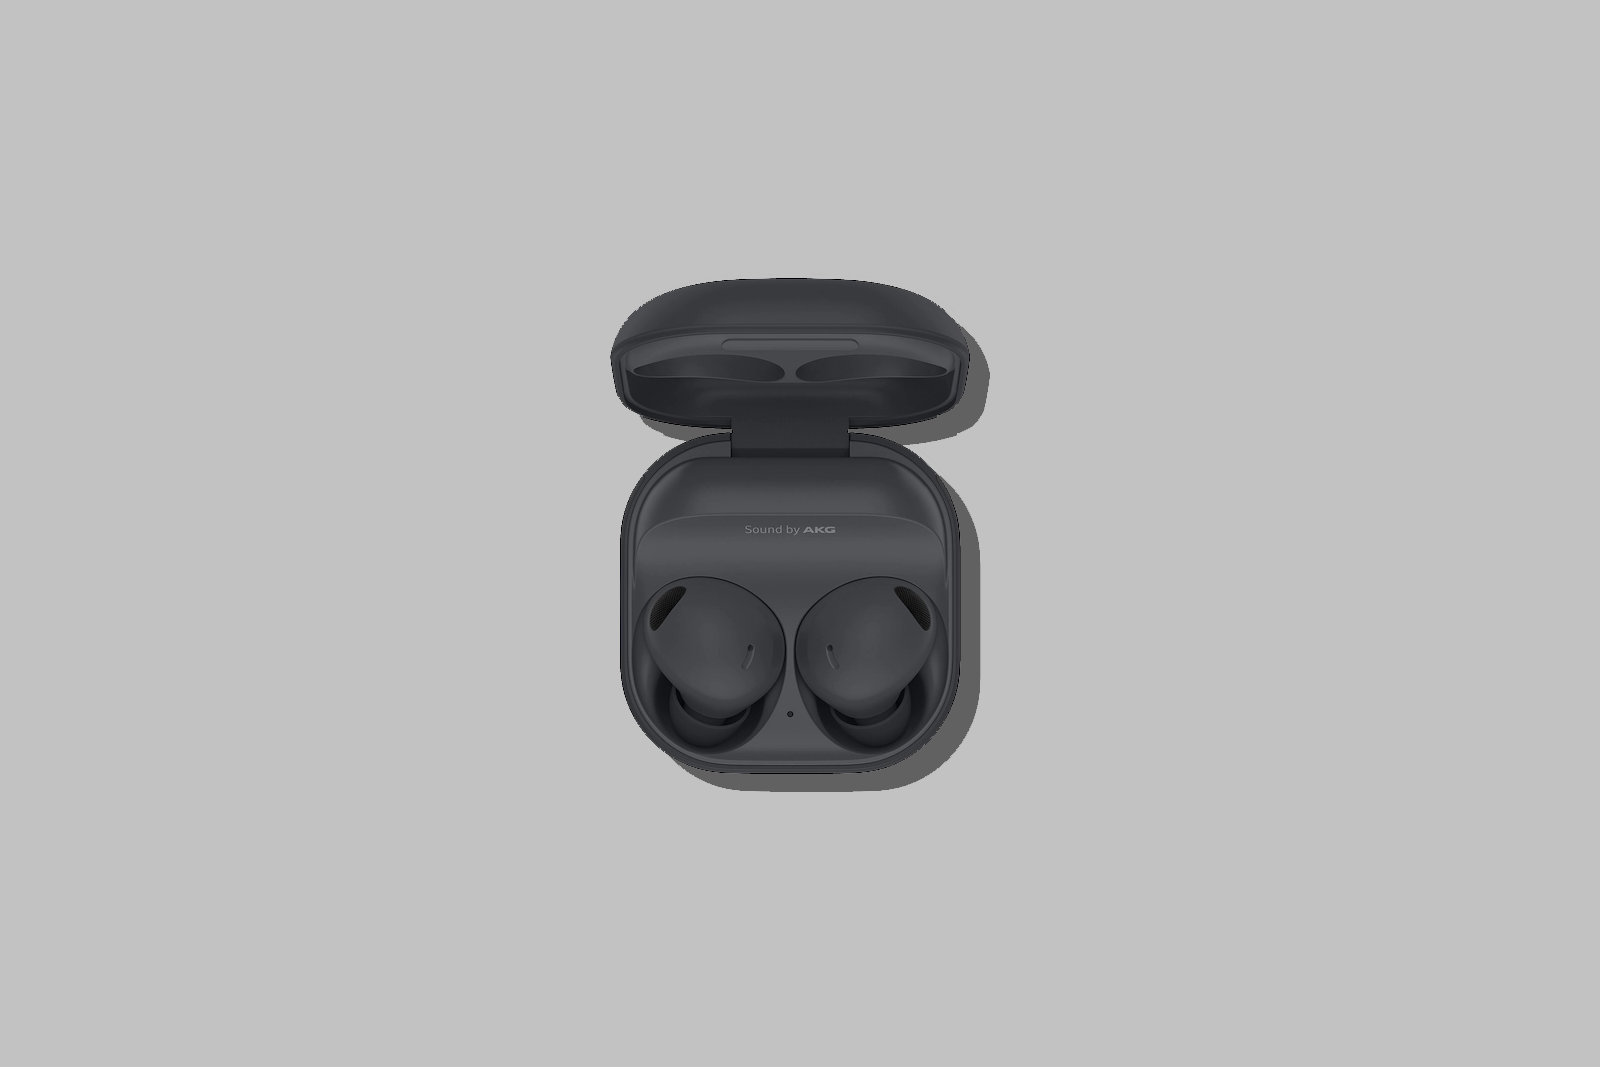 A featured image with the Samsung Galaxy Buds2 Pro at the center